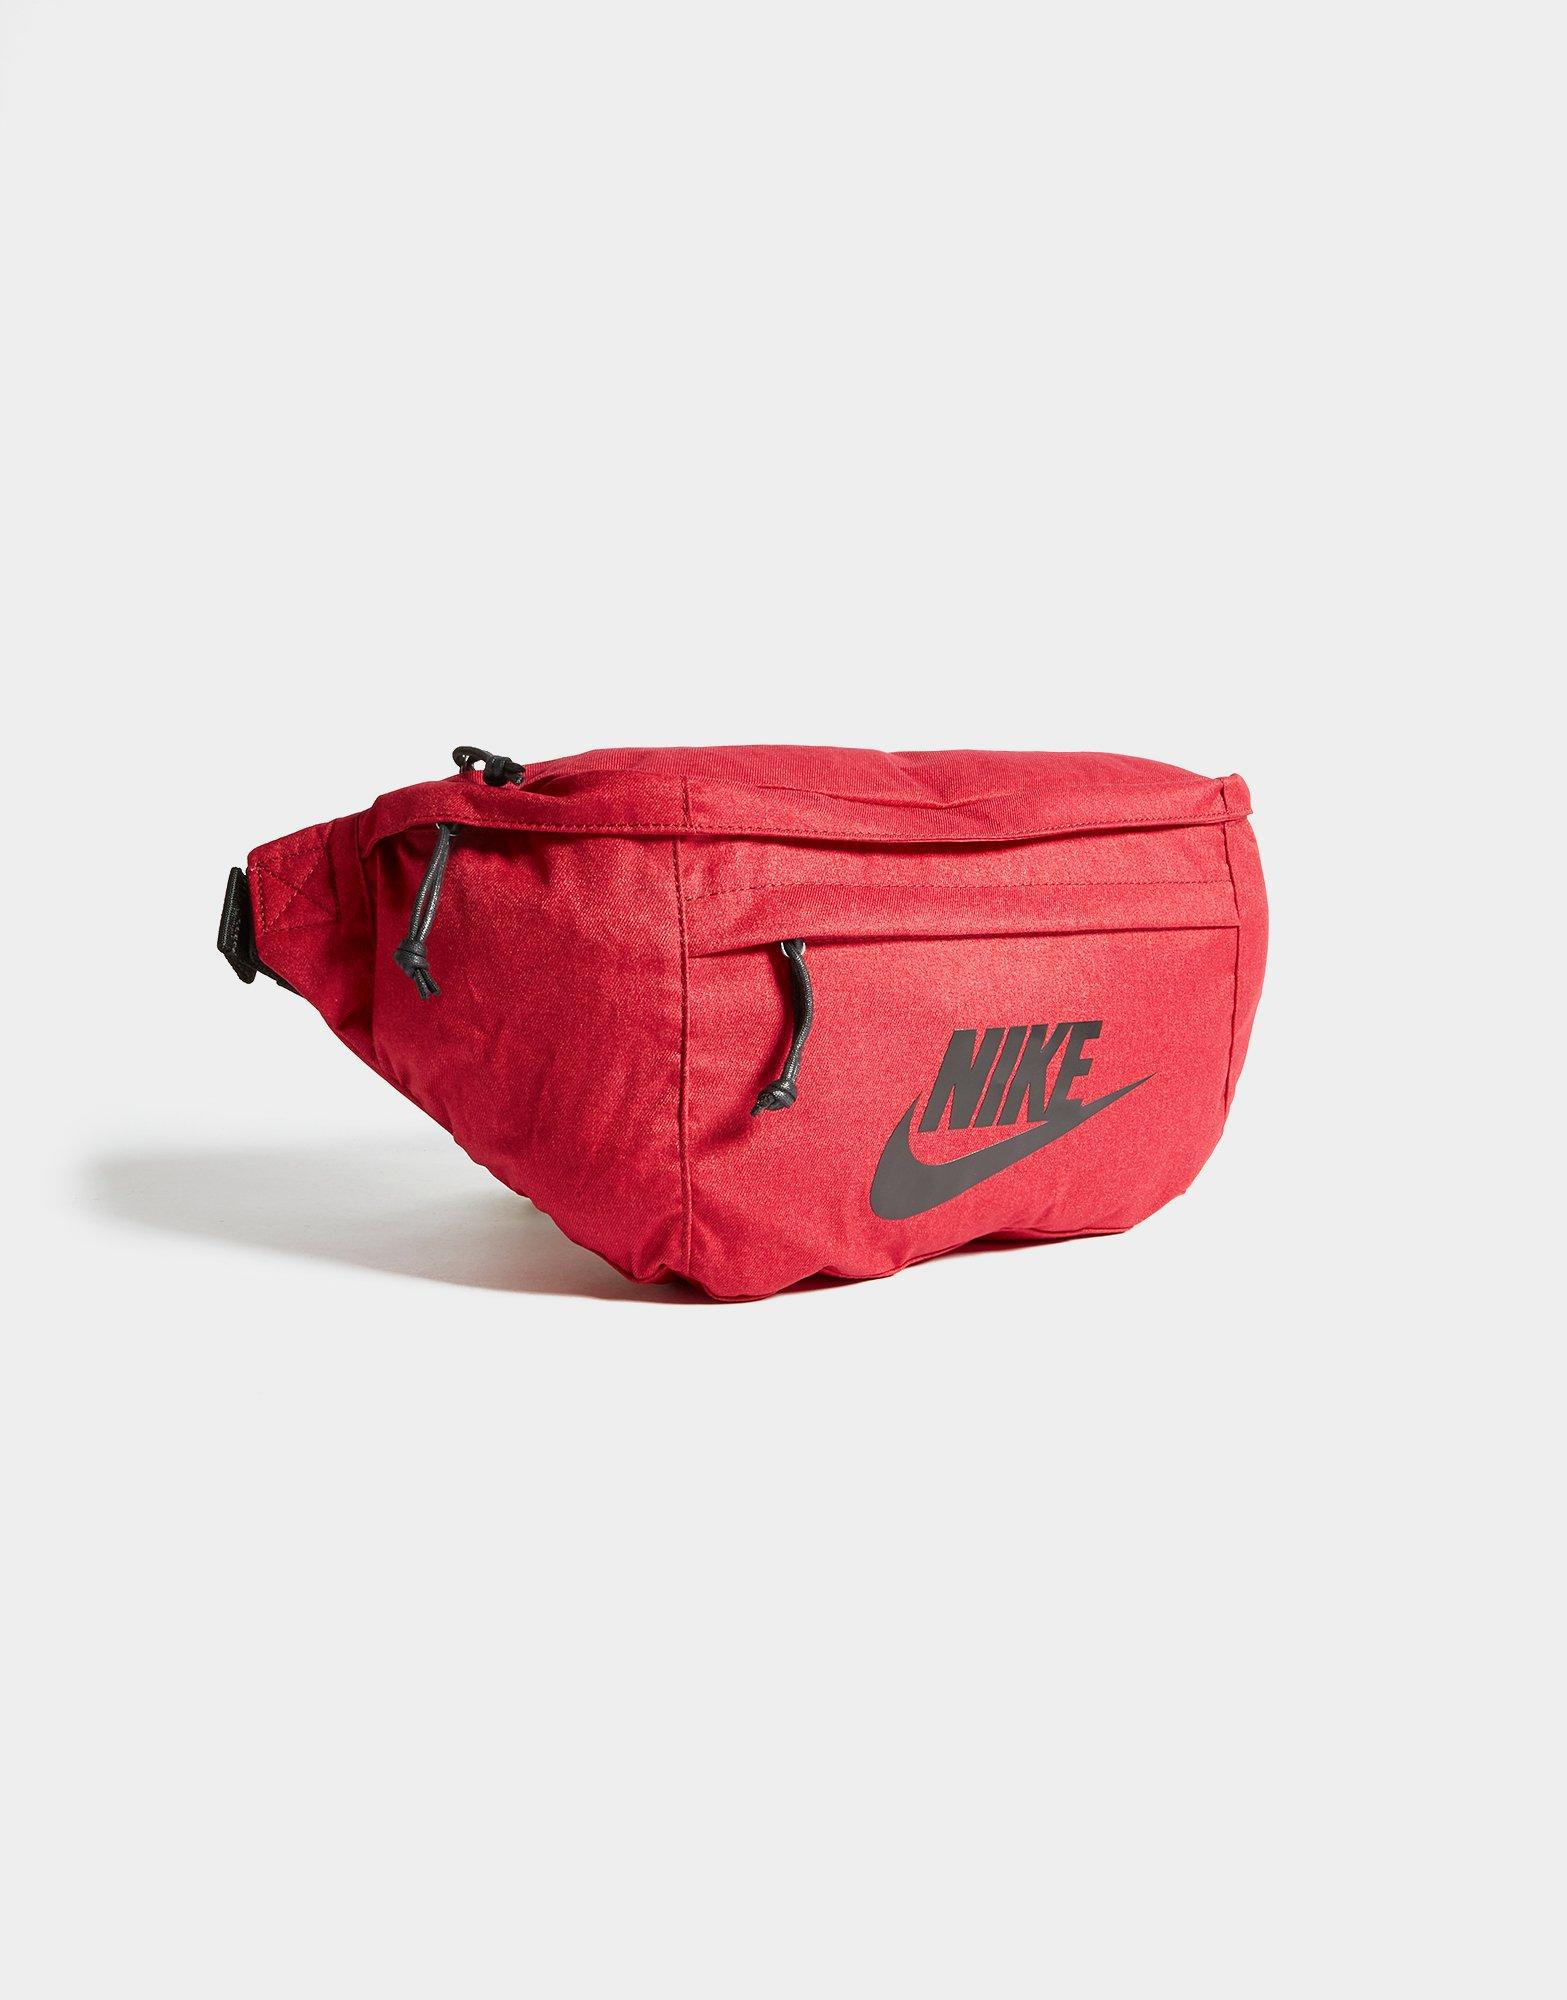 Nike Synthetic Tech Waist Bag in Red/Black (Red) - Lyst